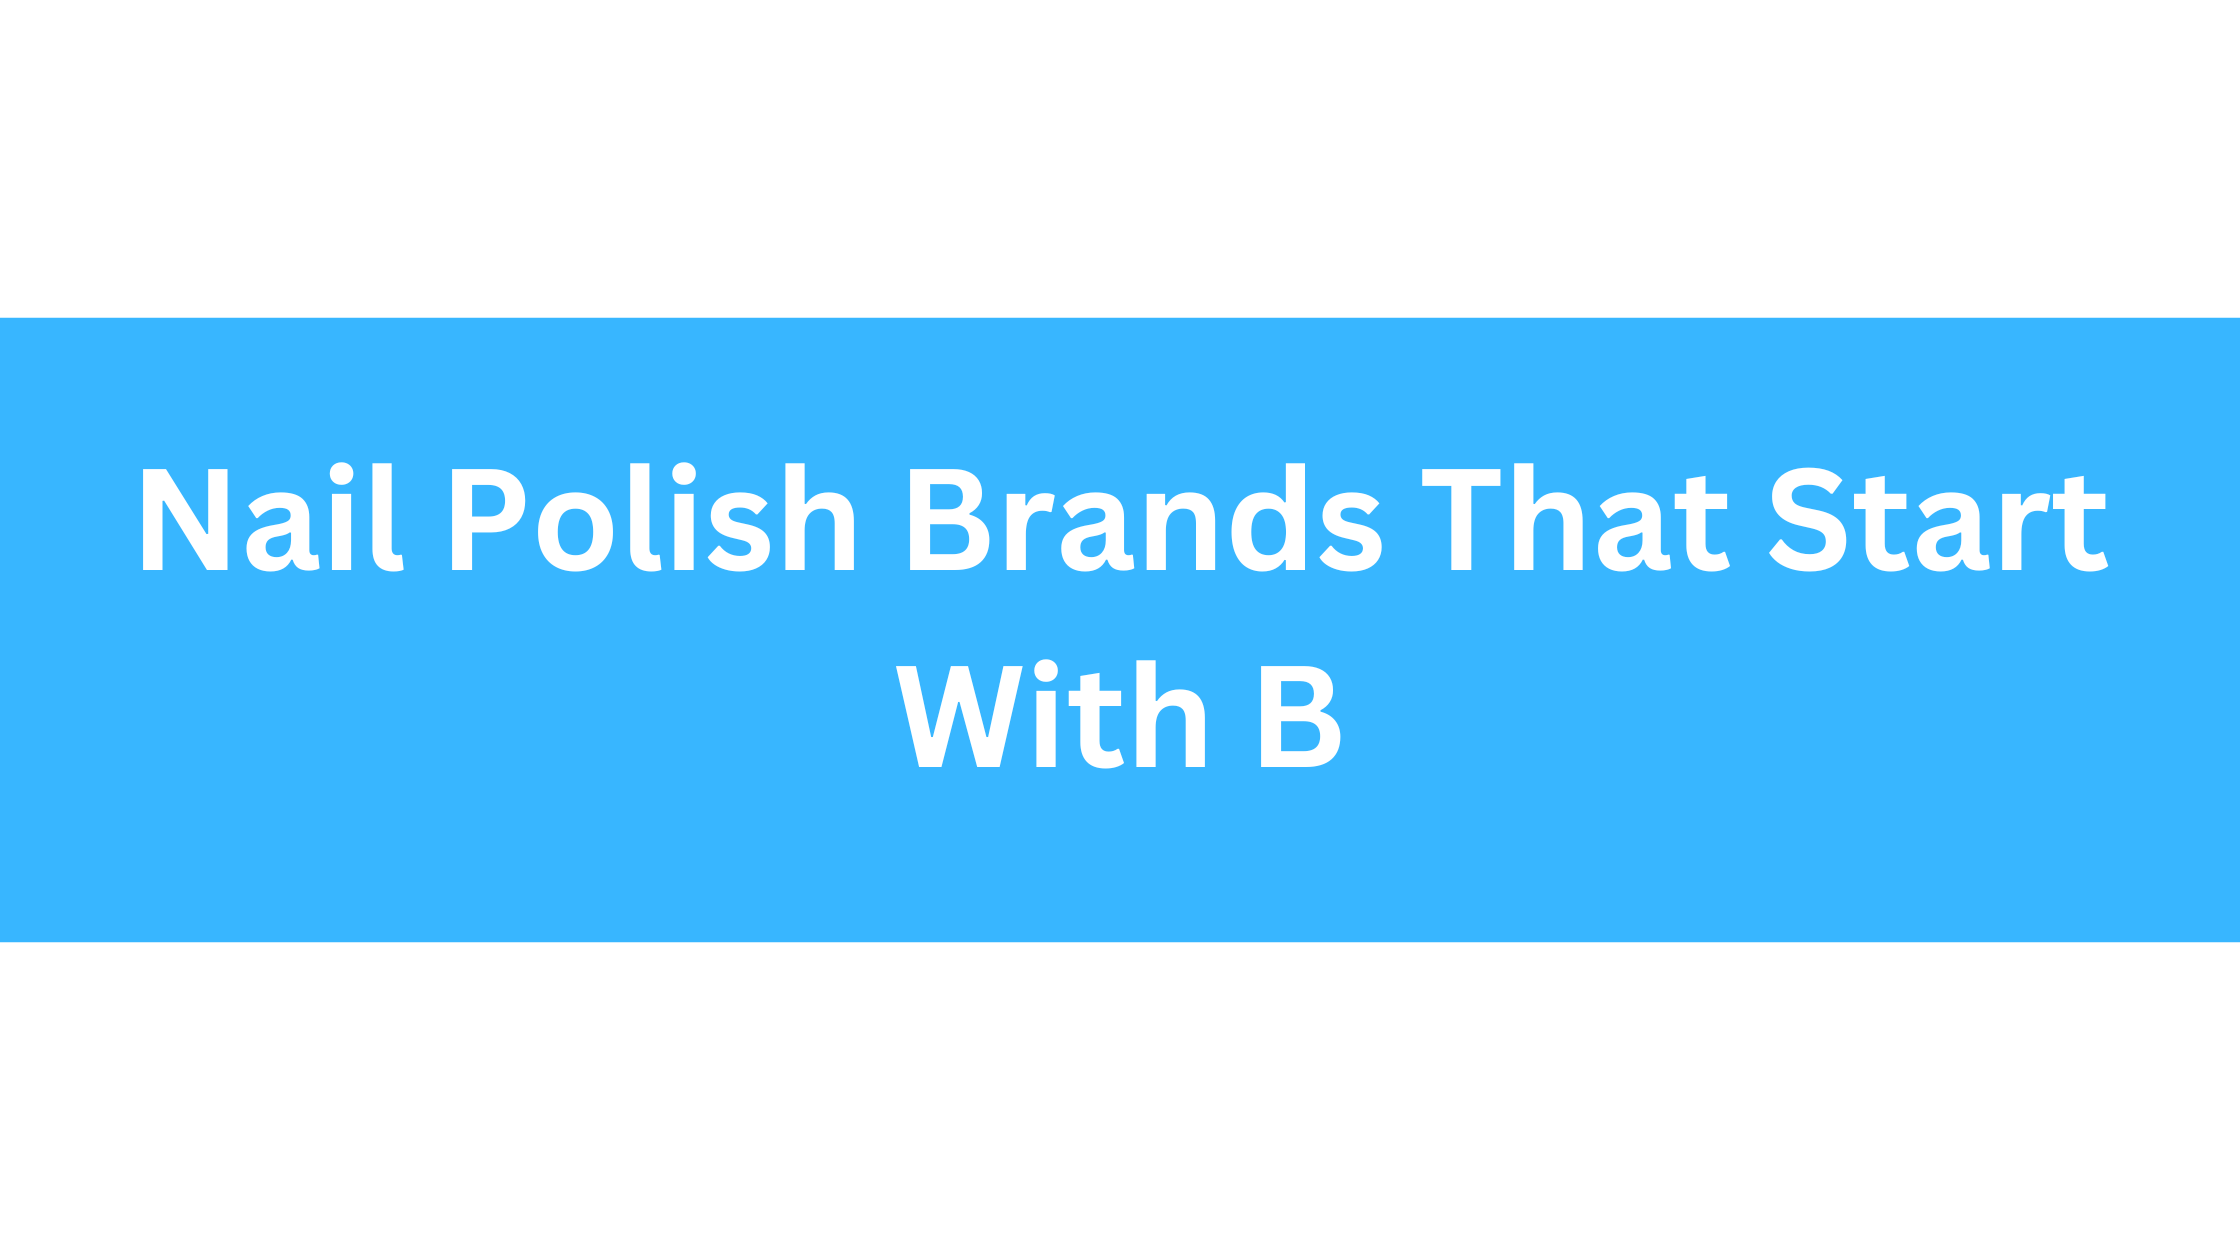 Nail Polish Brands That Start With B